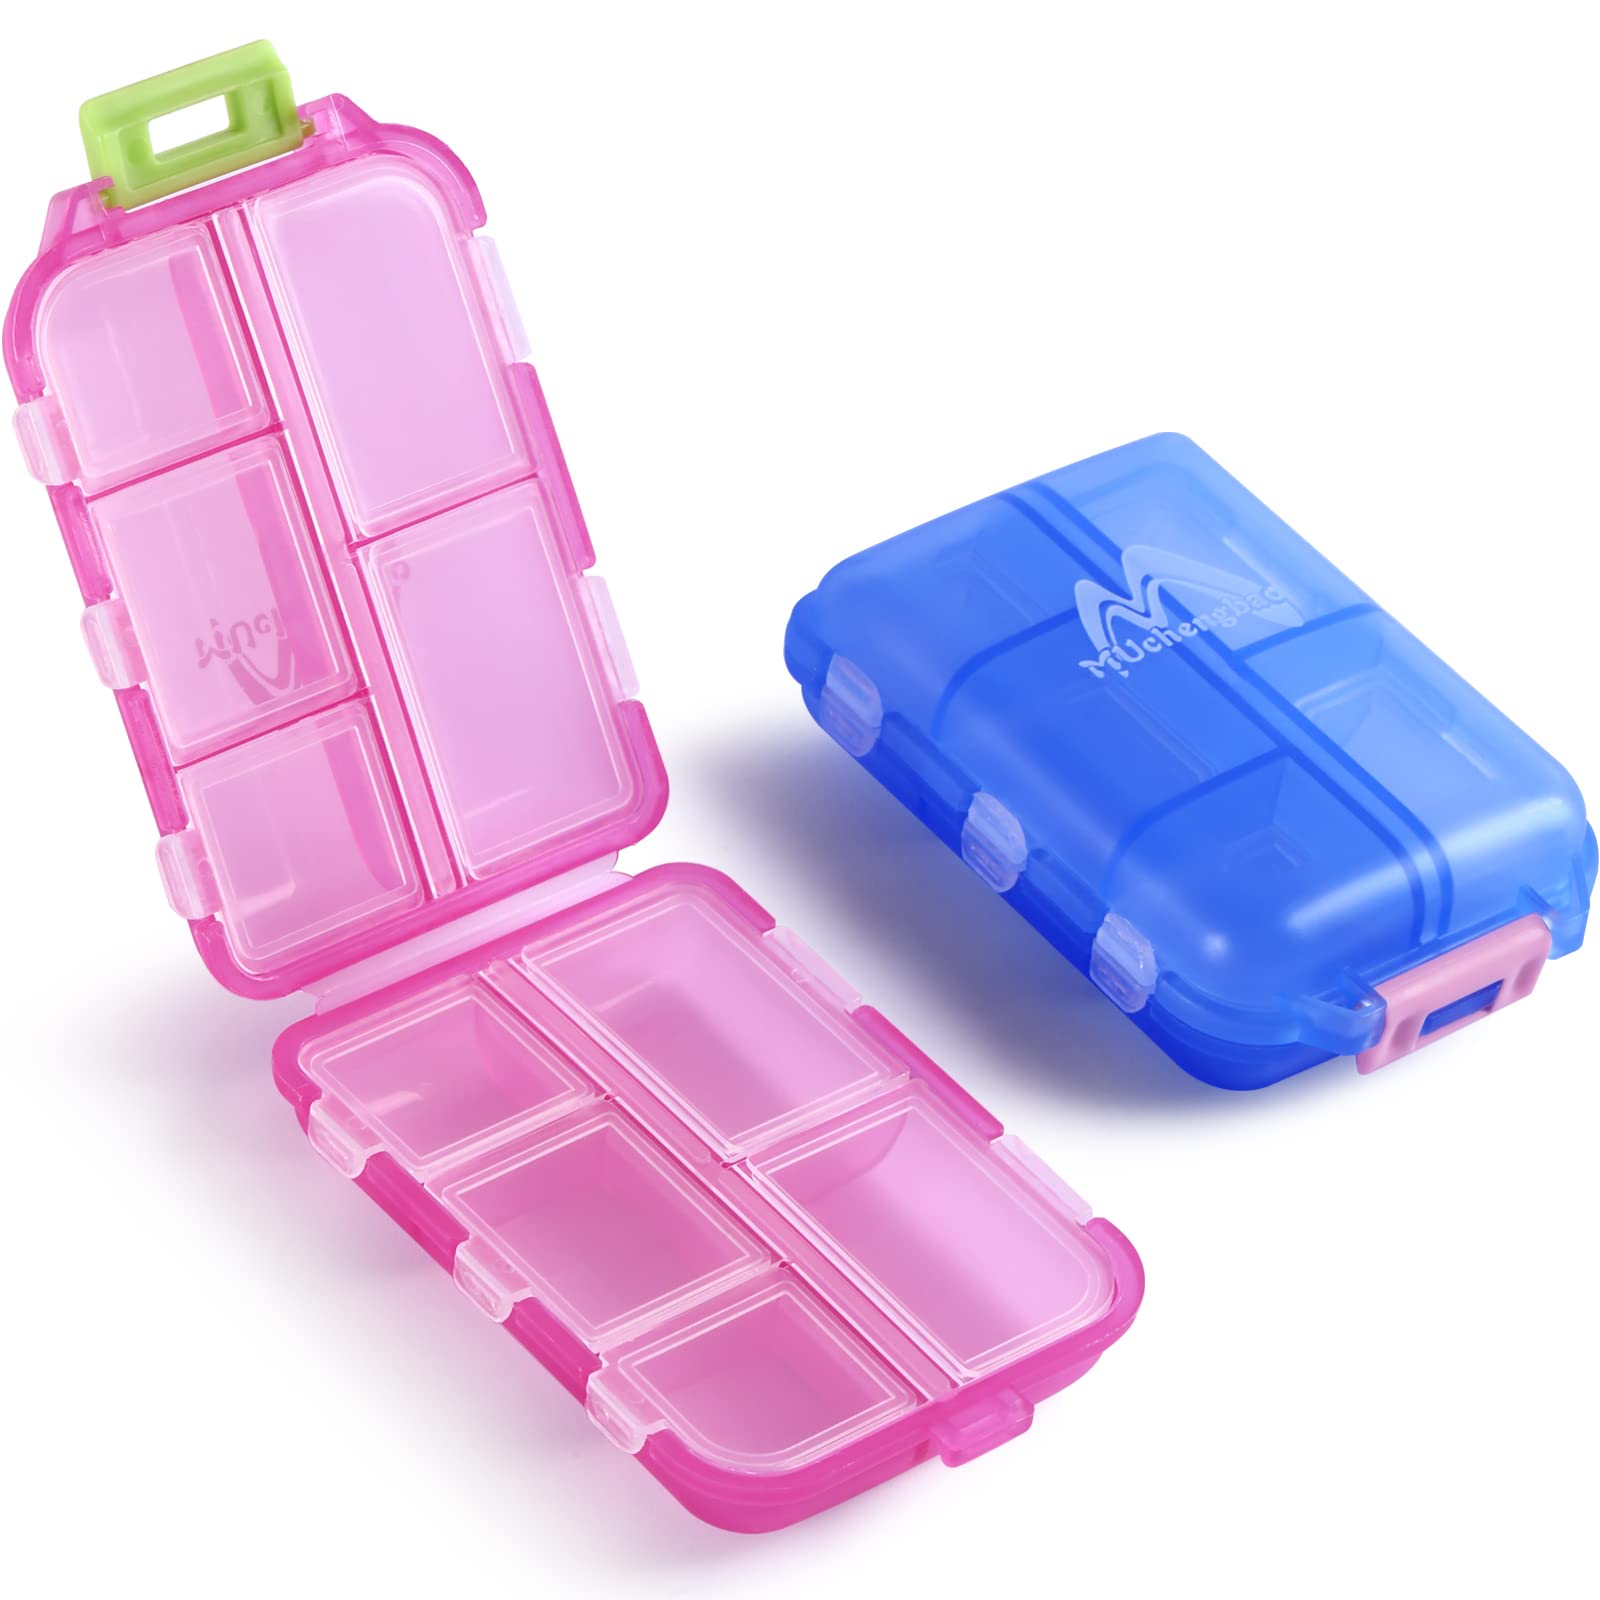  NOLITOY 2pcs Pill Box Daily Pill Box Travel Pill Case Travel  Organizer Small Compartment Organizer Box Travel Meds Pills Dispenser Pills  Case Compartment Pills Box Round Abs : Health & Household